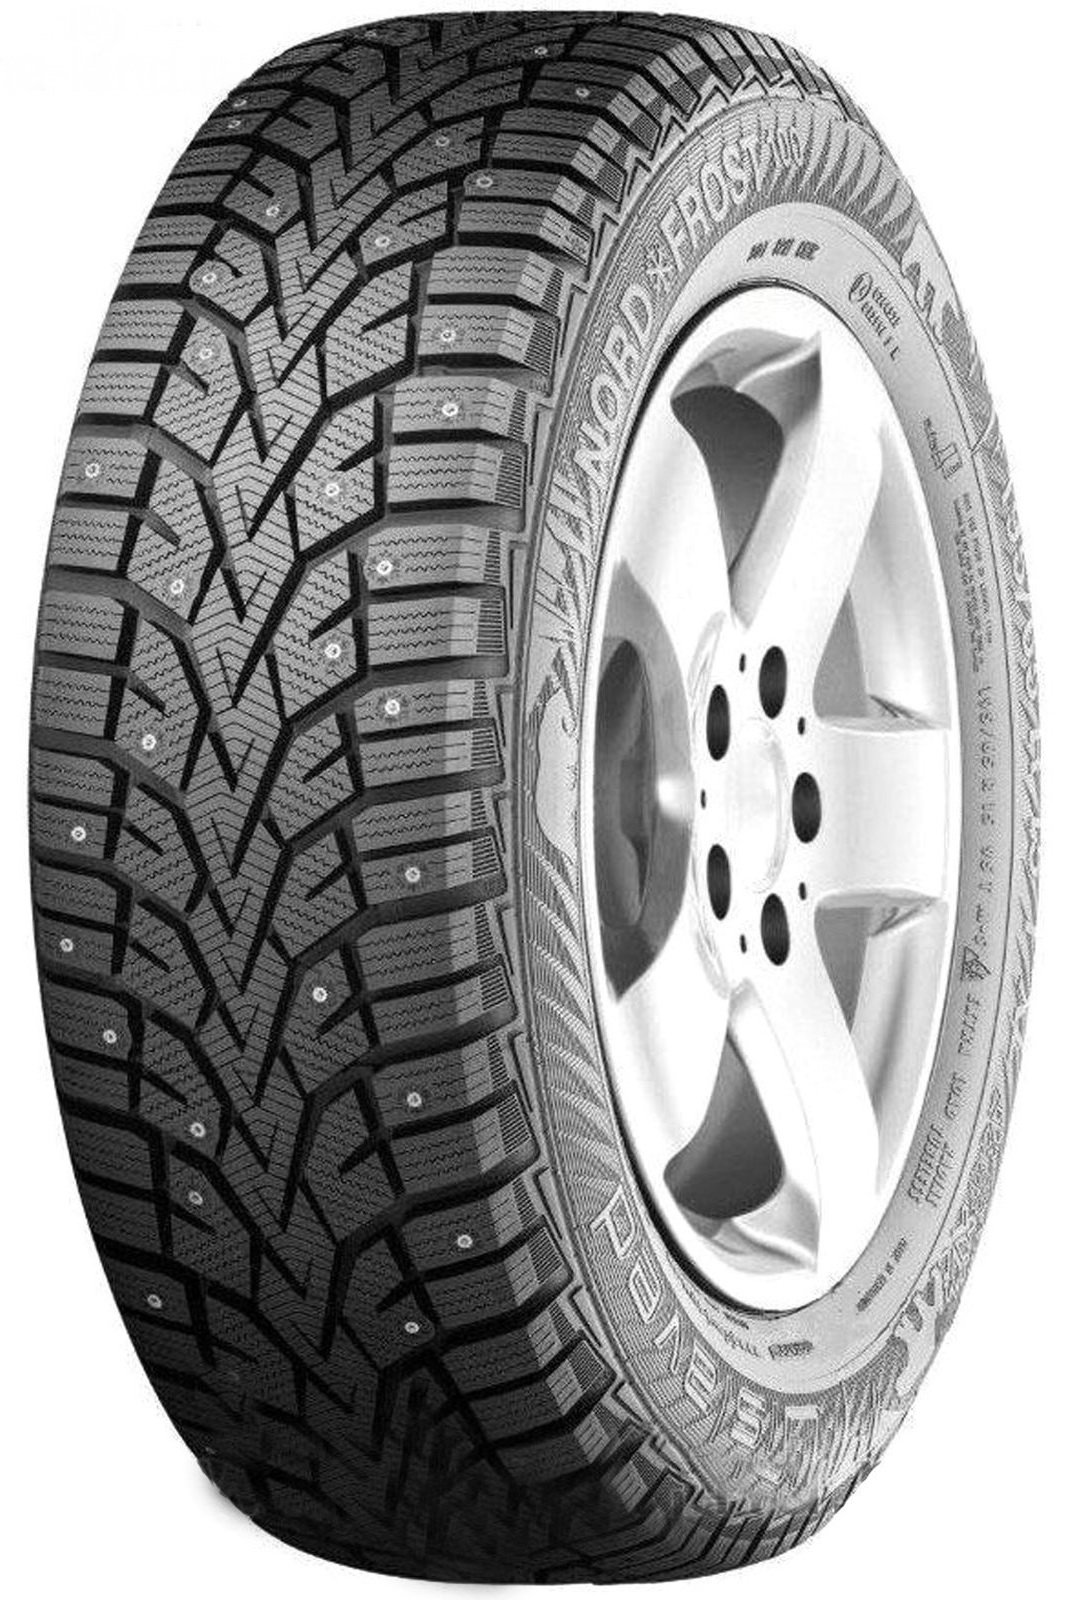 Gislaved 215/50R17 95T XL Nord*Frost 100 TL FR CD (.)